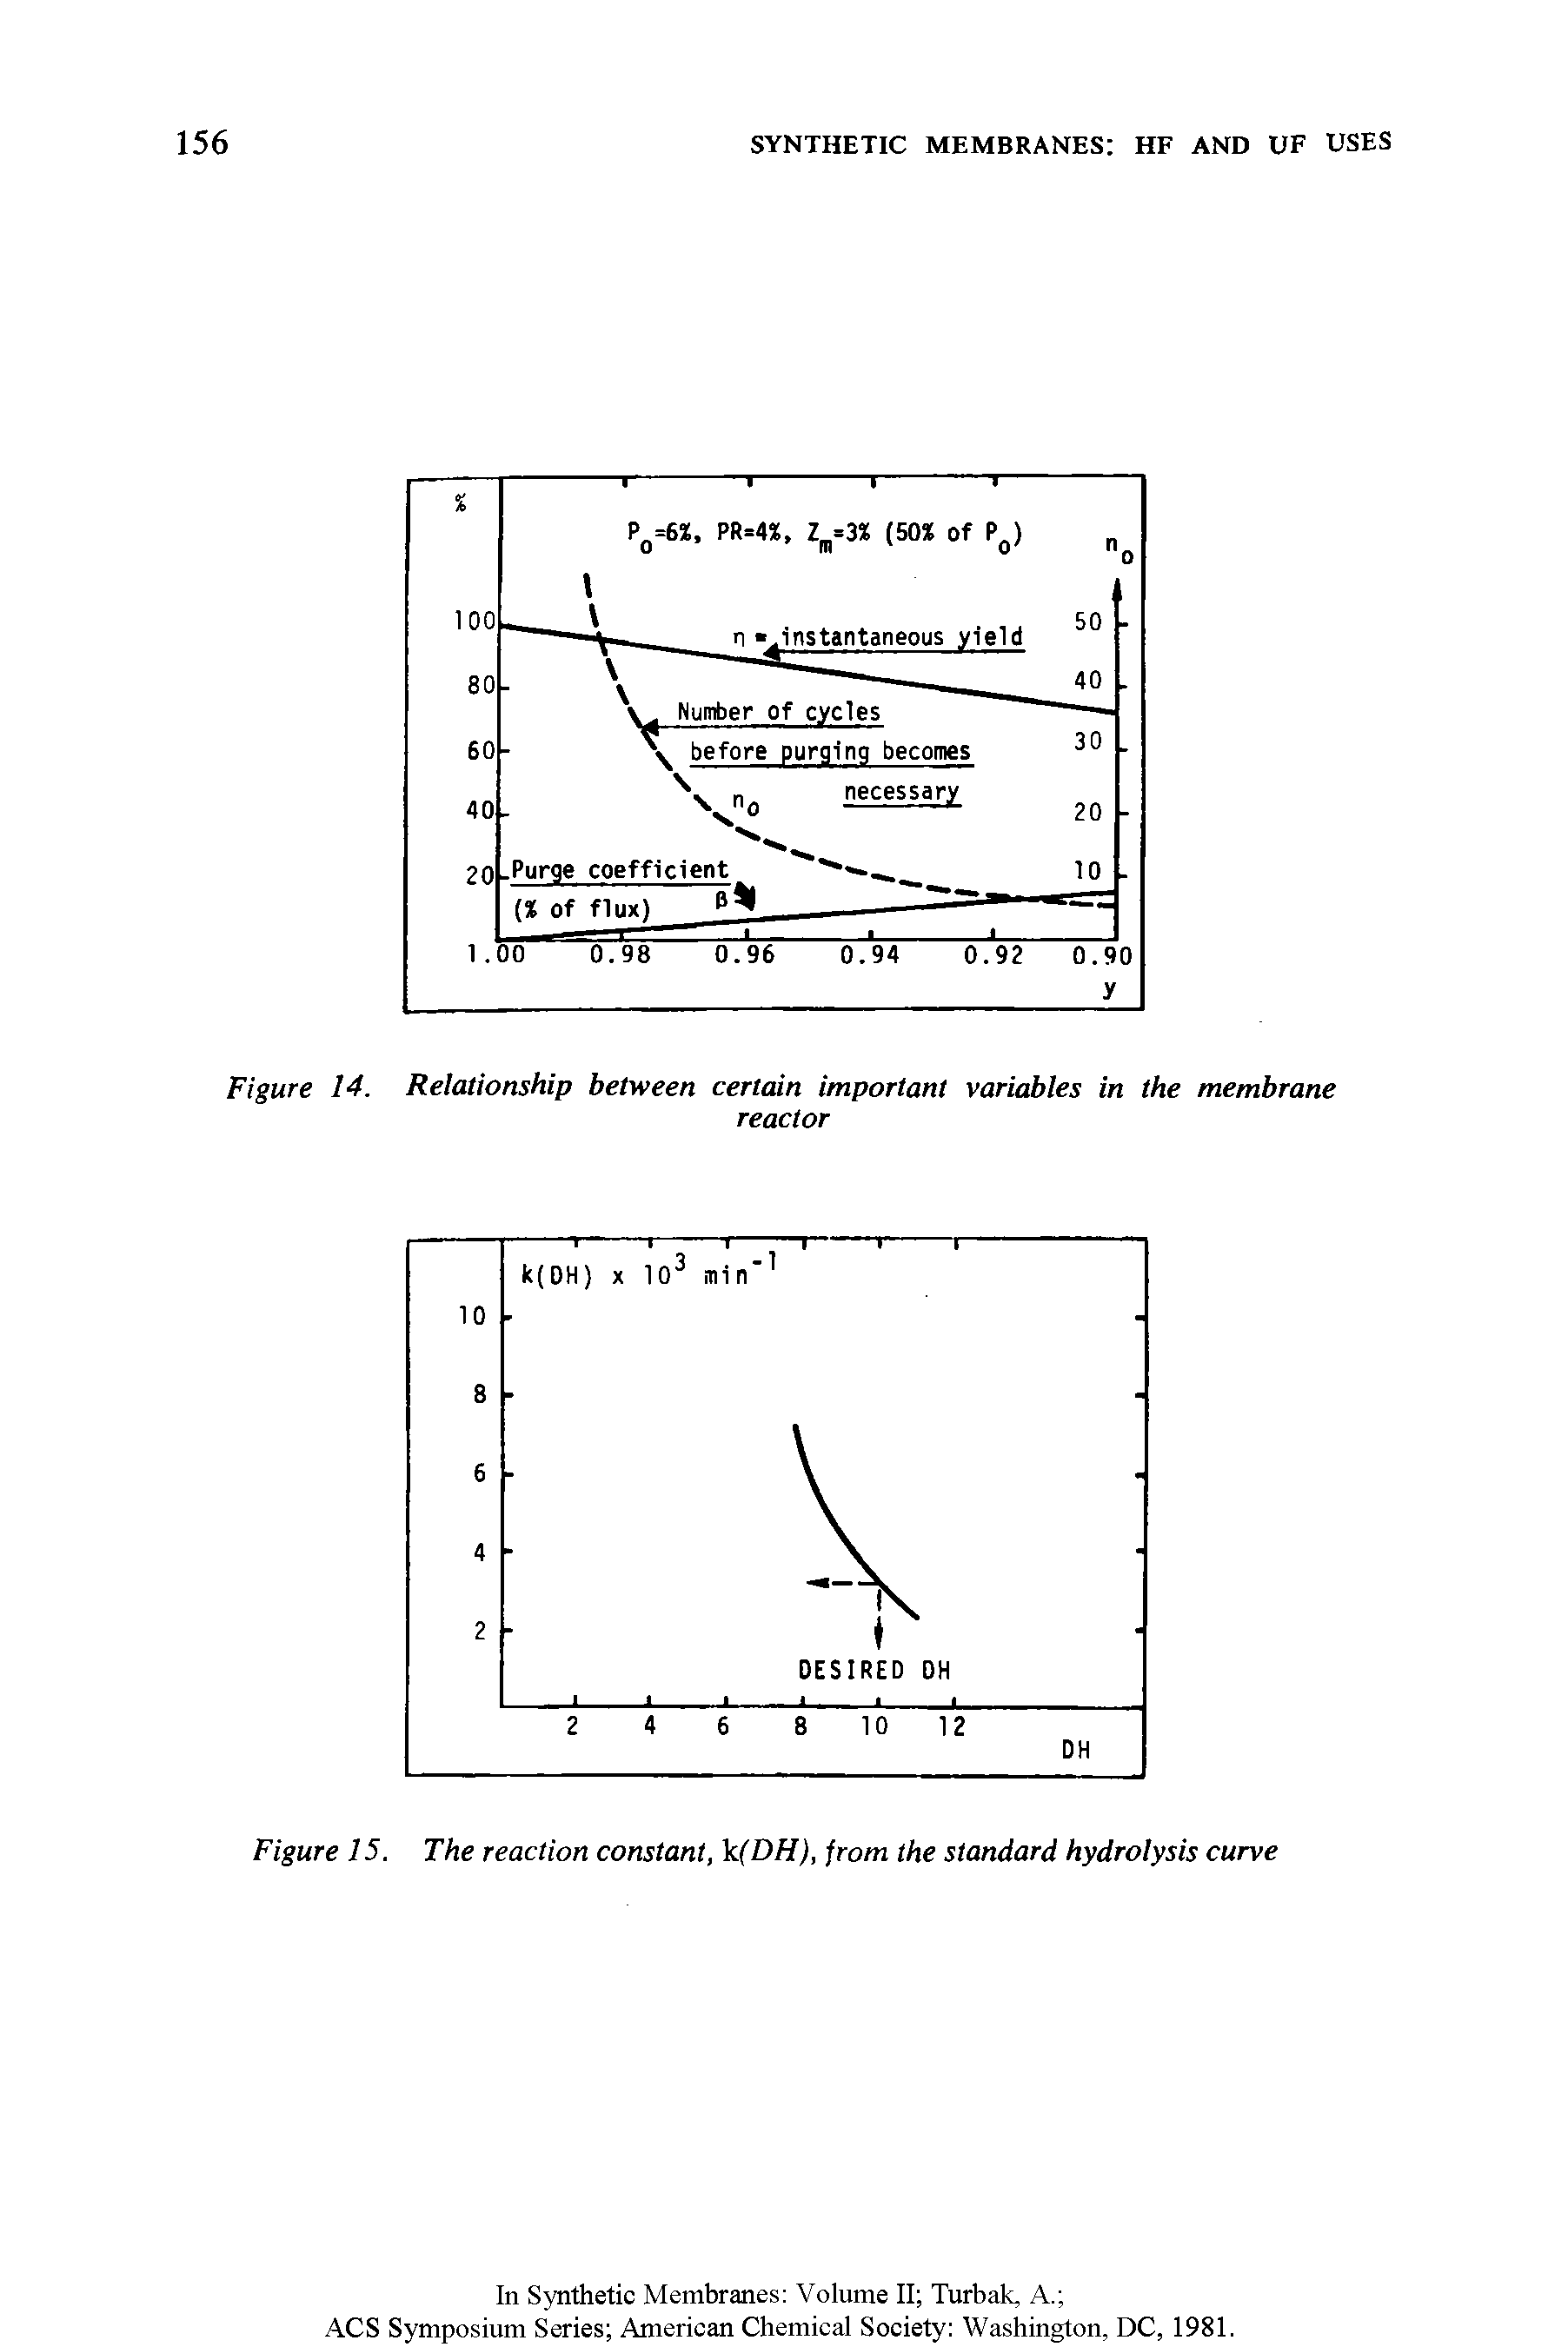 Figure 15, The reaction constant, k(DH), from the standard hydrolysis curve...